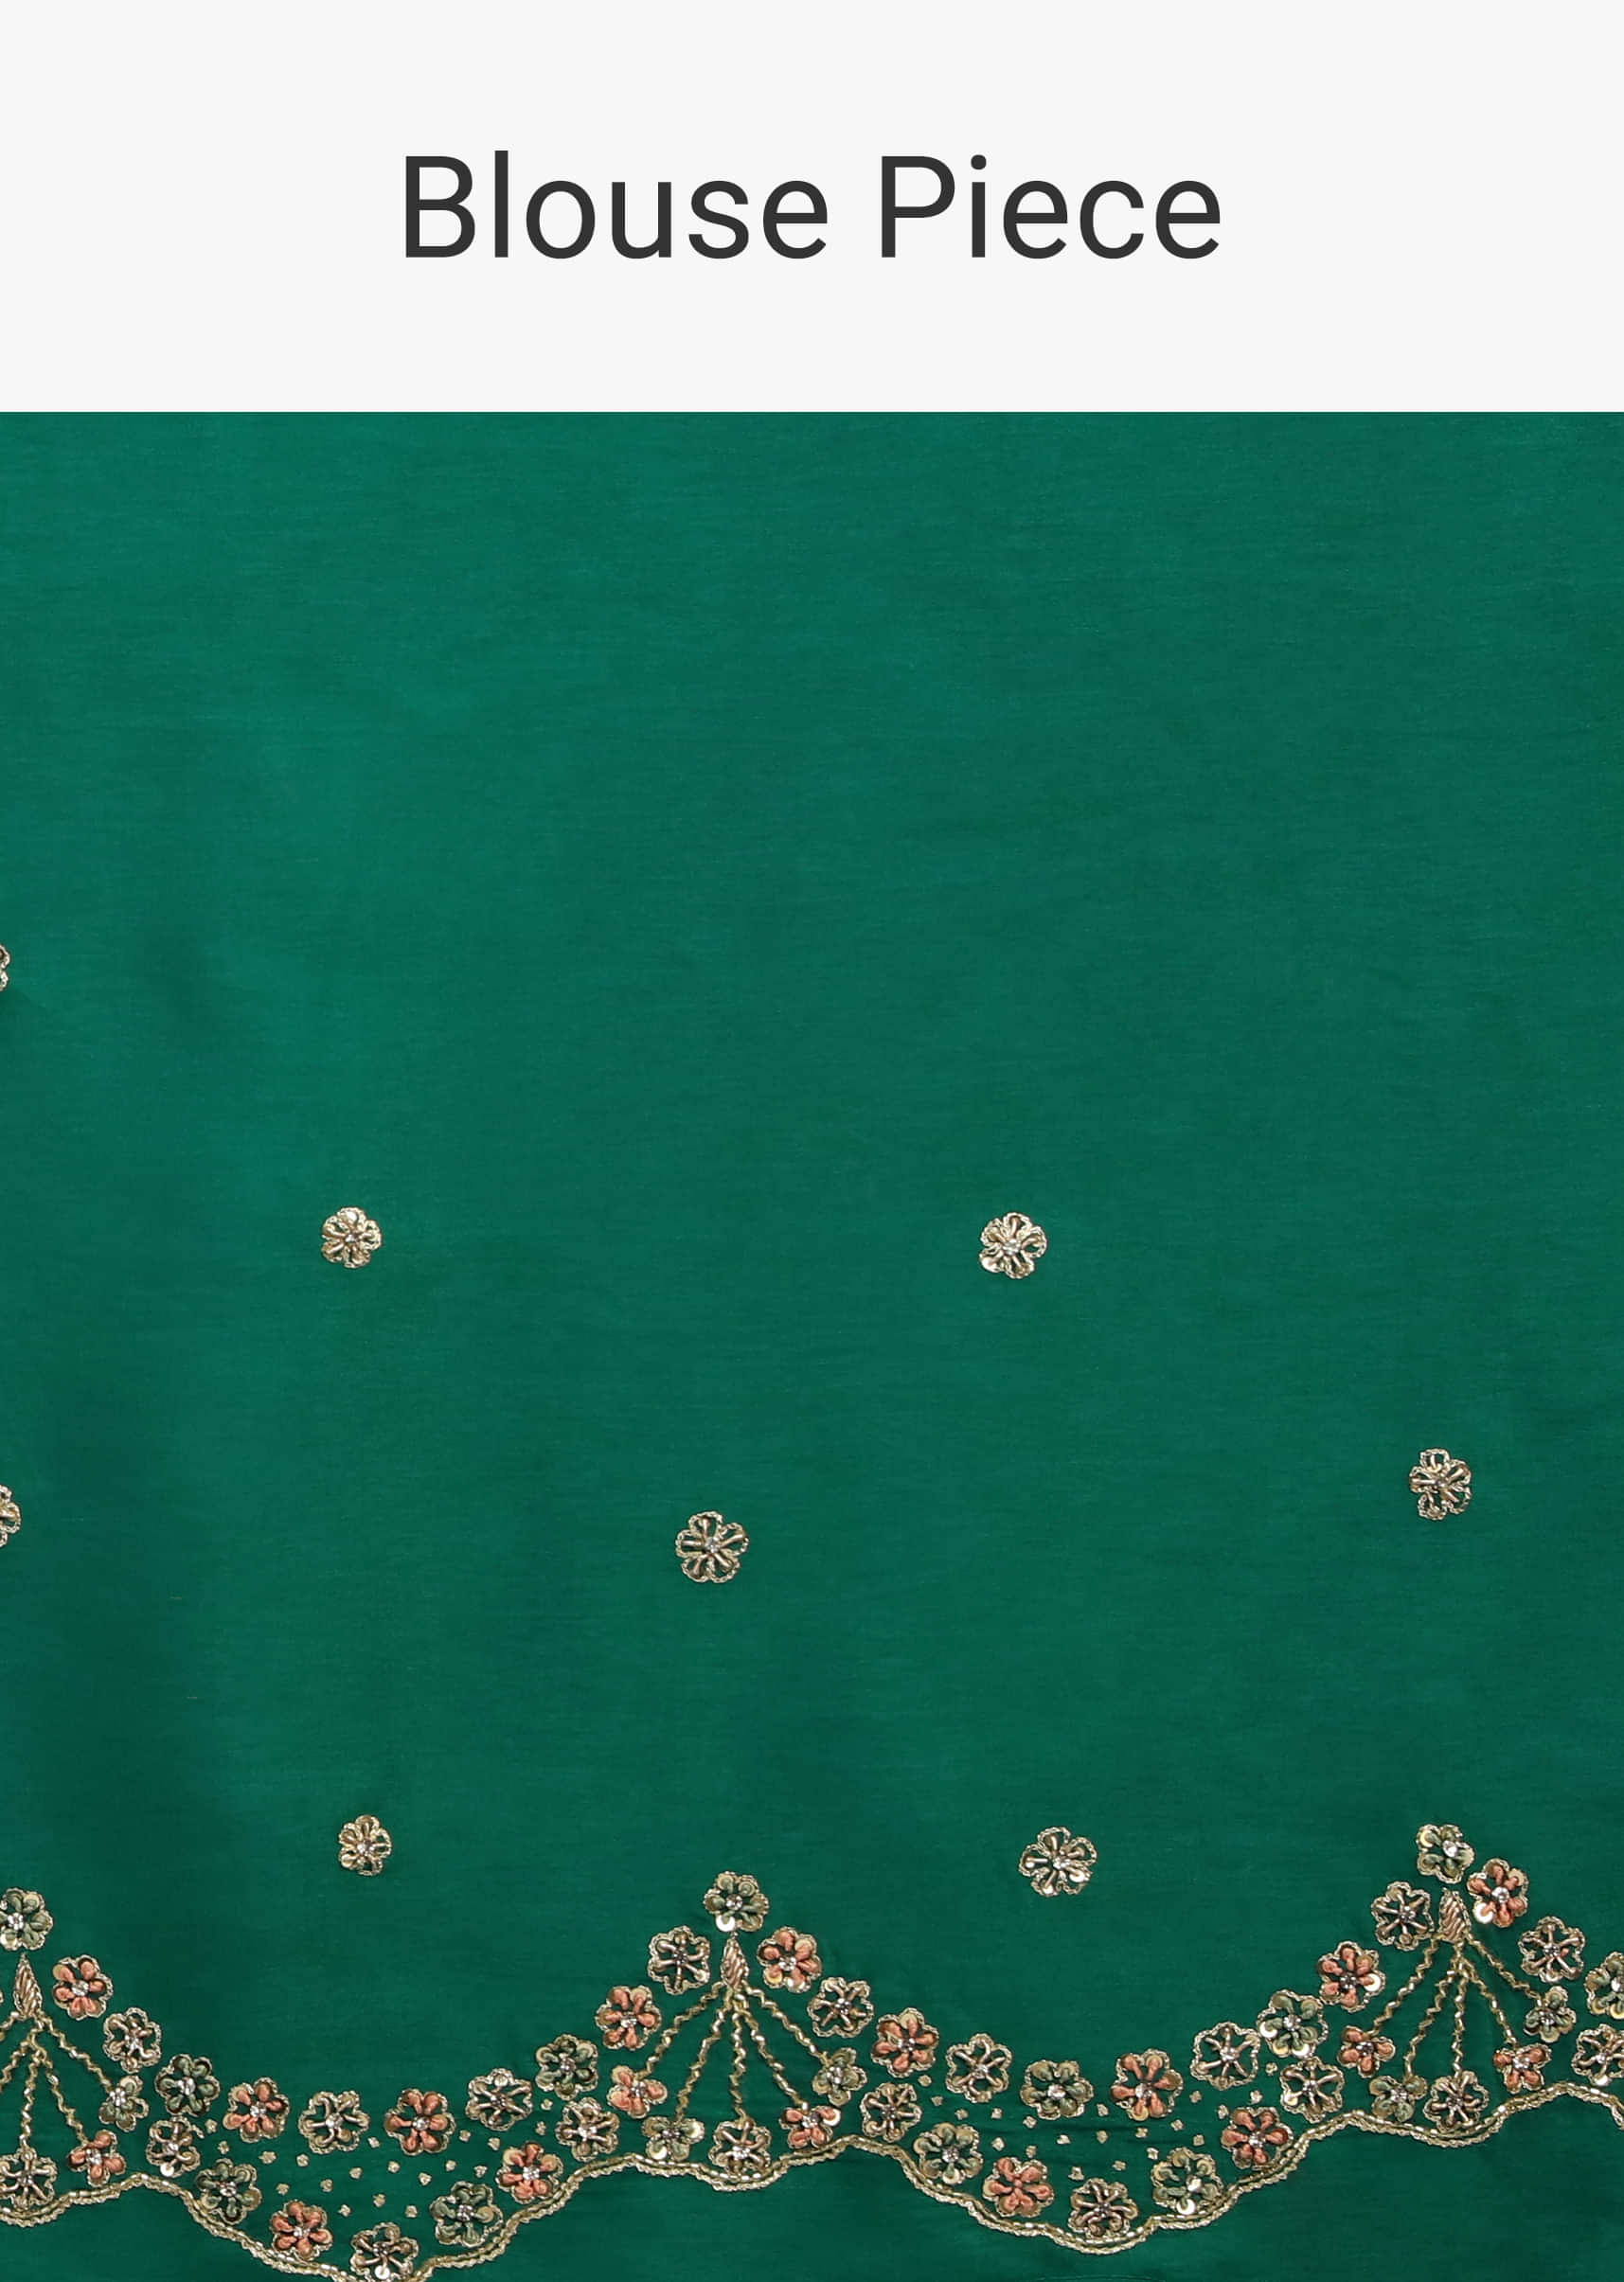 Teal Green Saree In Dupion Silk With Hand Embroidered Scallop Cut Border With Thread And Sequins Flowers  